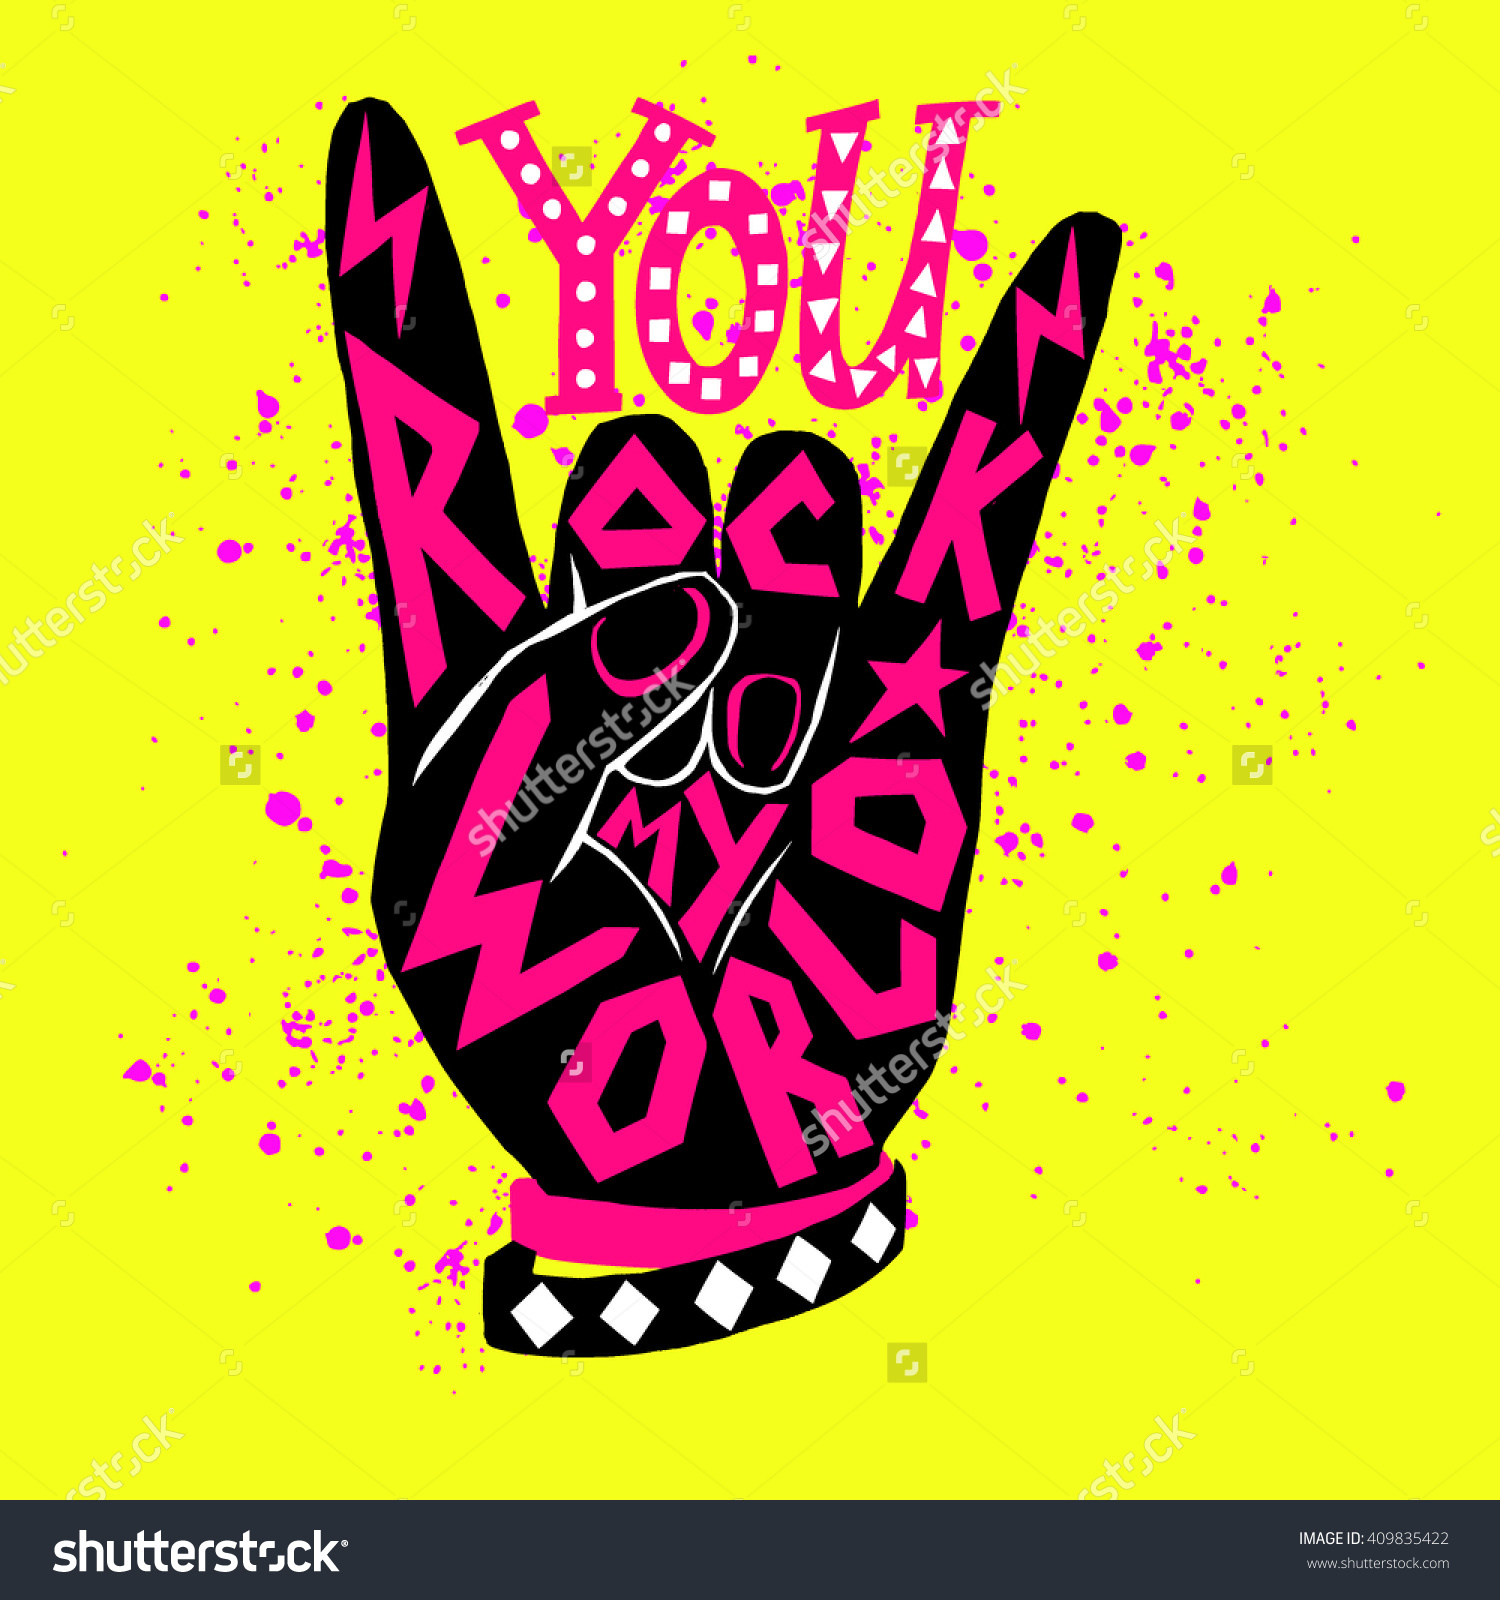 You Rock My World Poster Design Stock Vector 409835422.